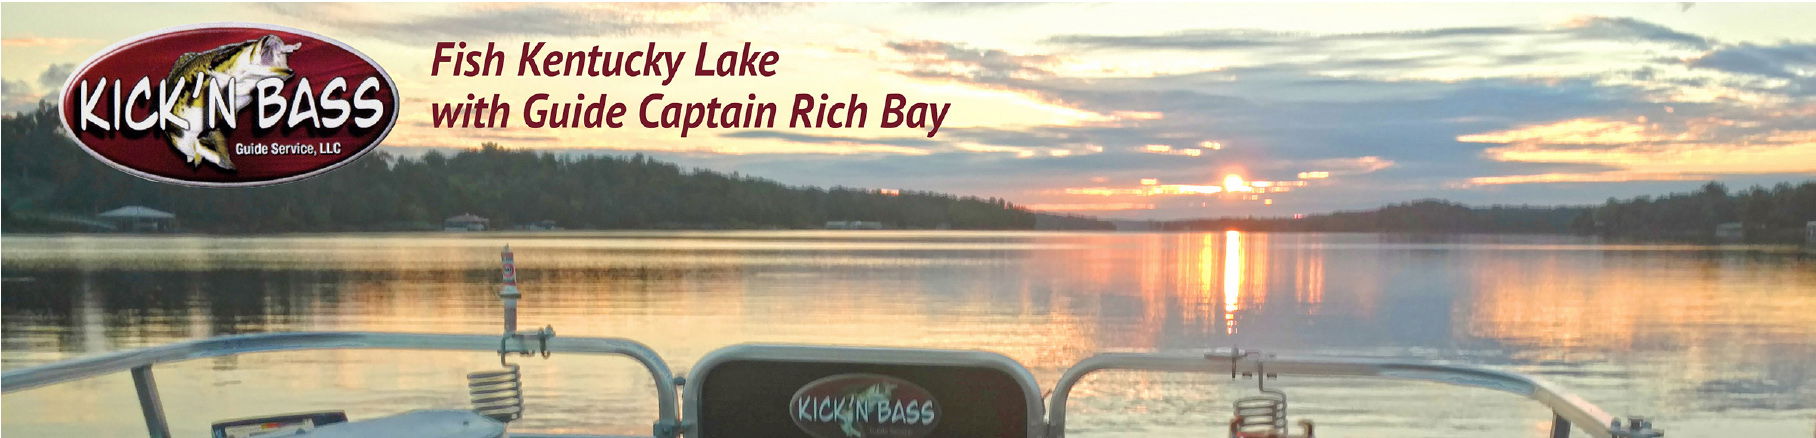 Your Kick'n Bass Fishing Report for July 16, 2018